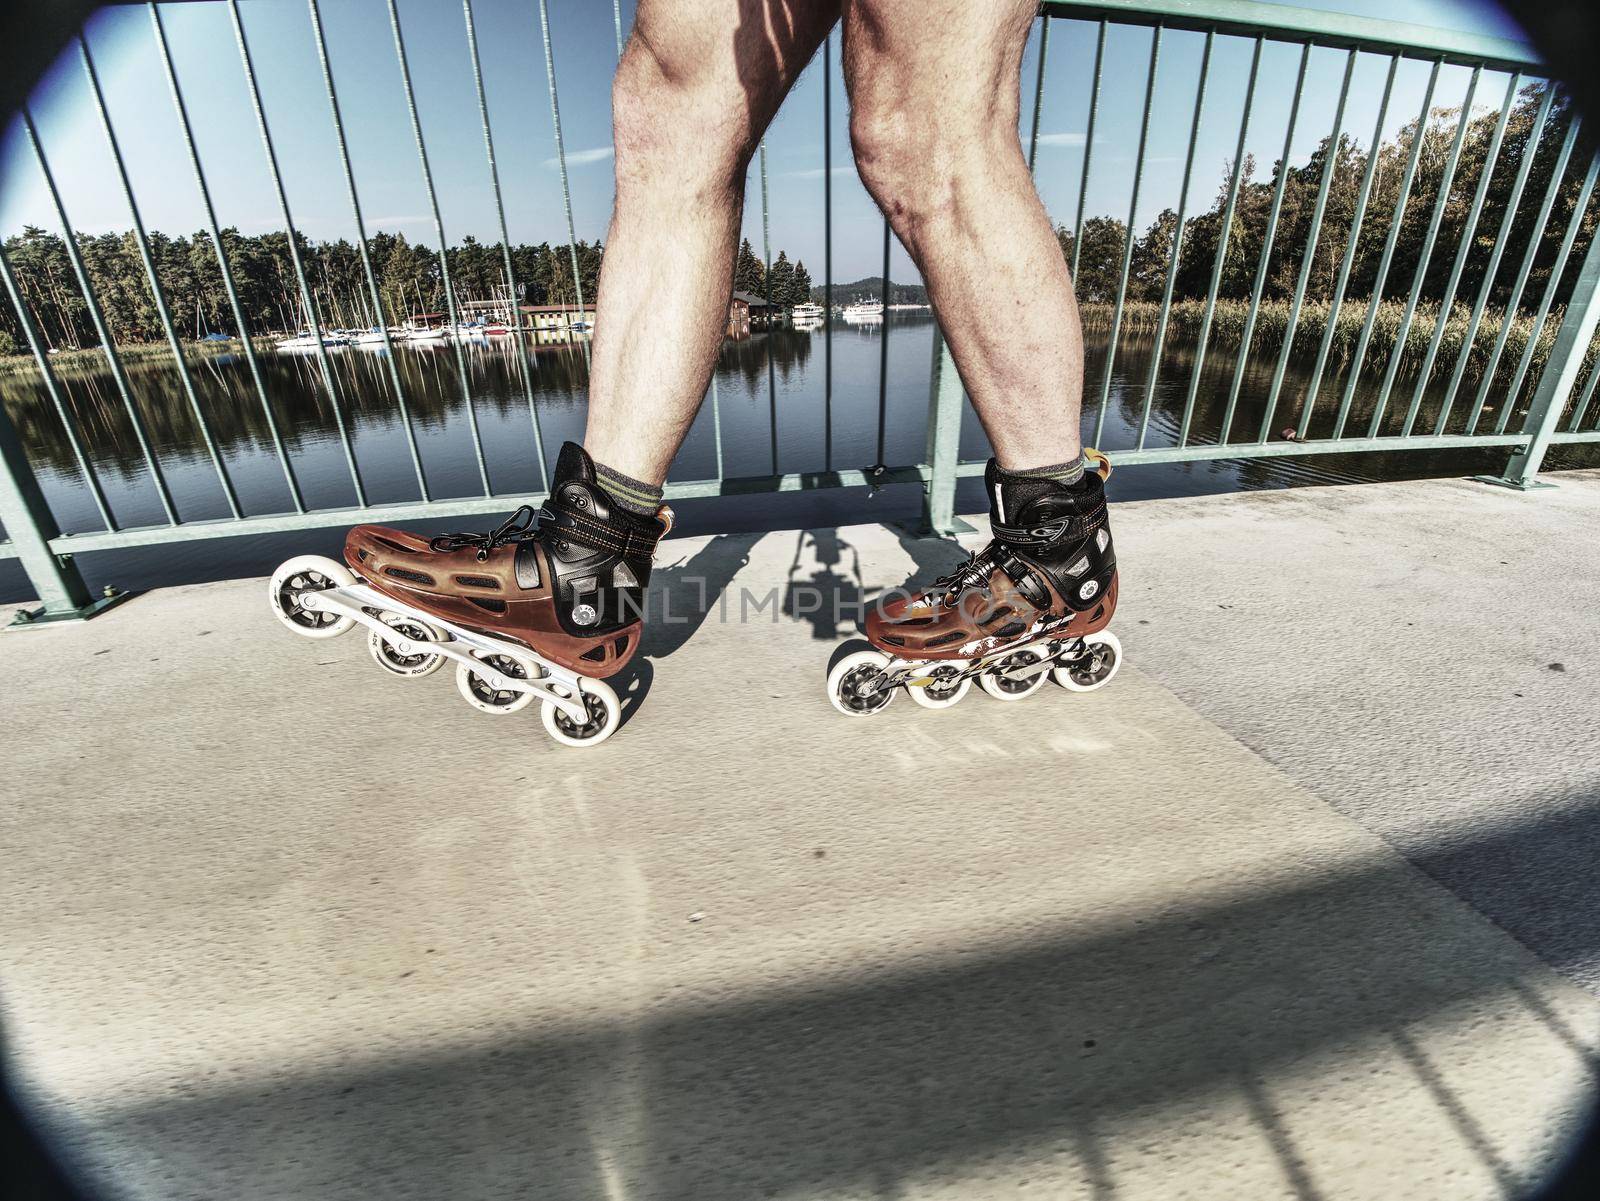 Man roller skater in speed hard shell skates.  Man try trick on the pathway by rdonar2